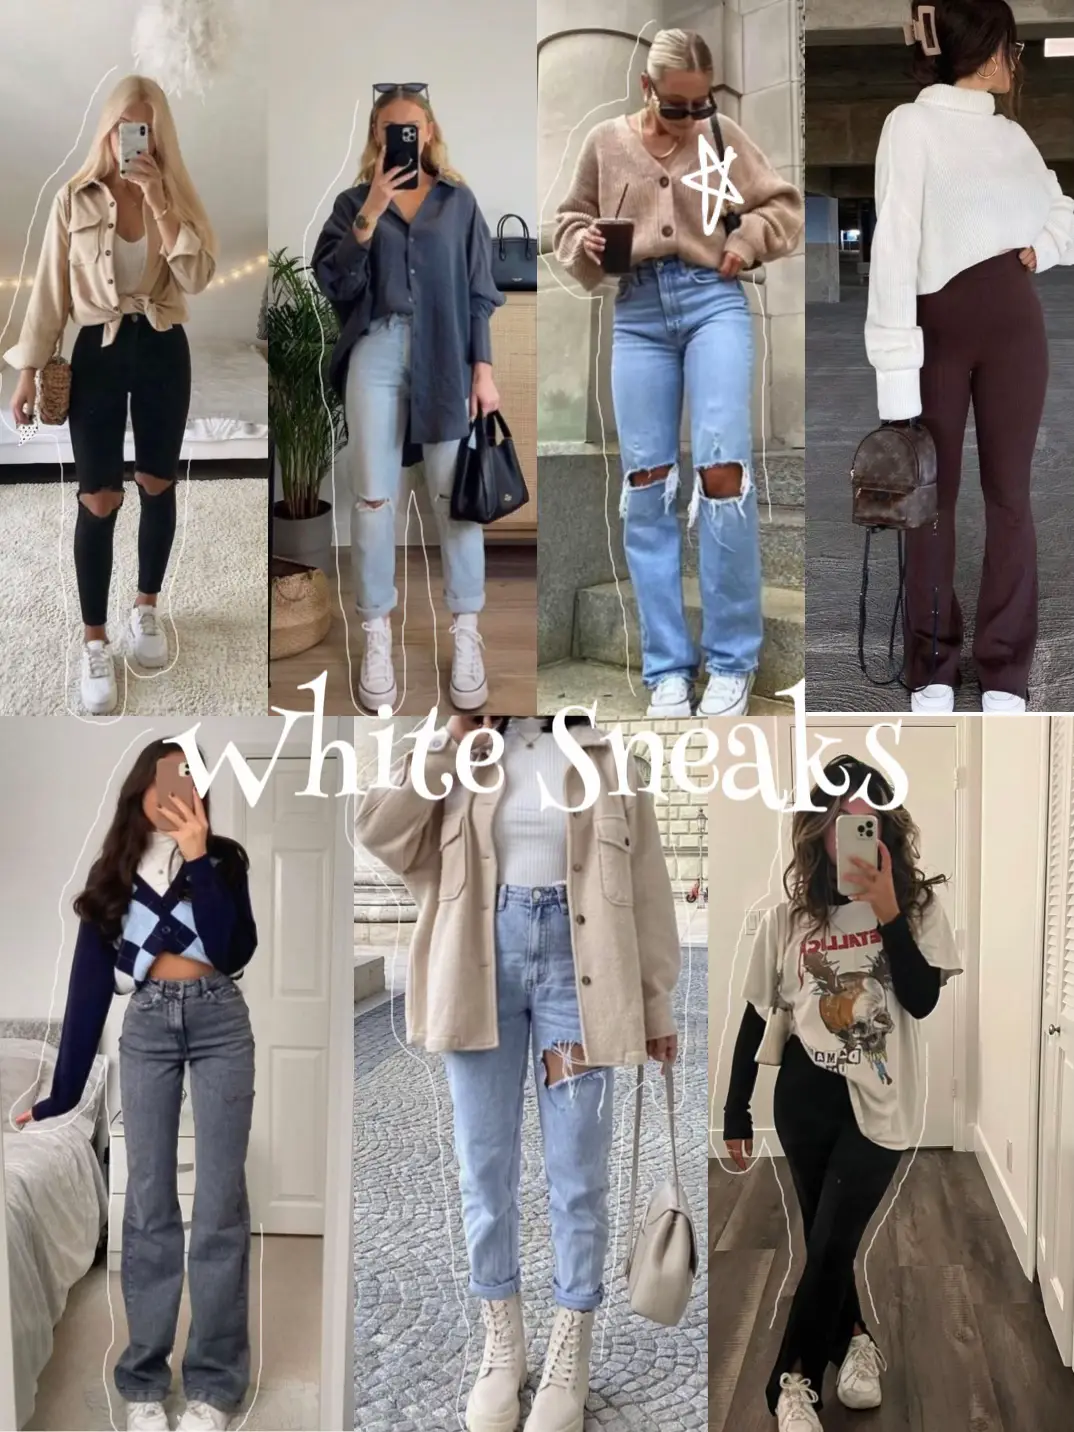 Ripped Jeans Outfit Ideas For Millennial Women - The Jacket Maker Blog